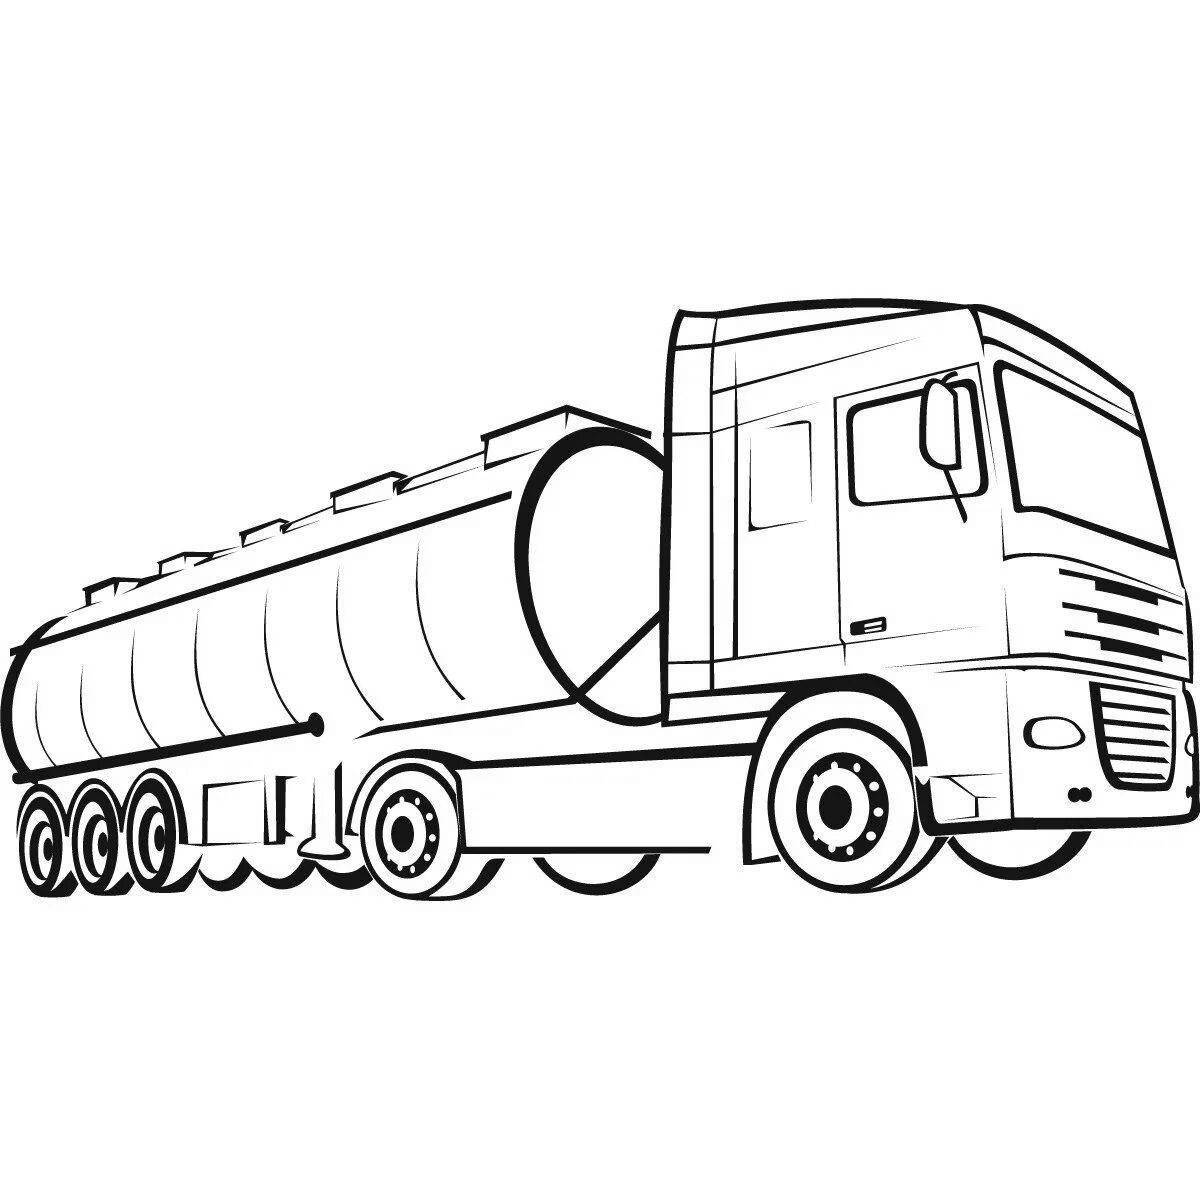 Awesome cement truck coloring page